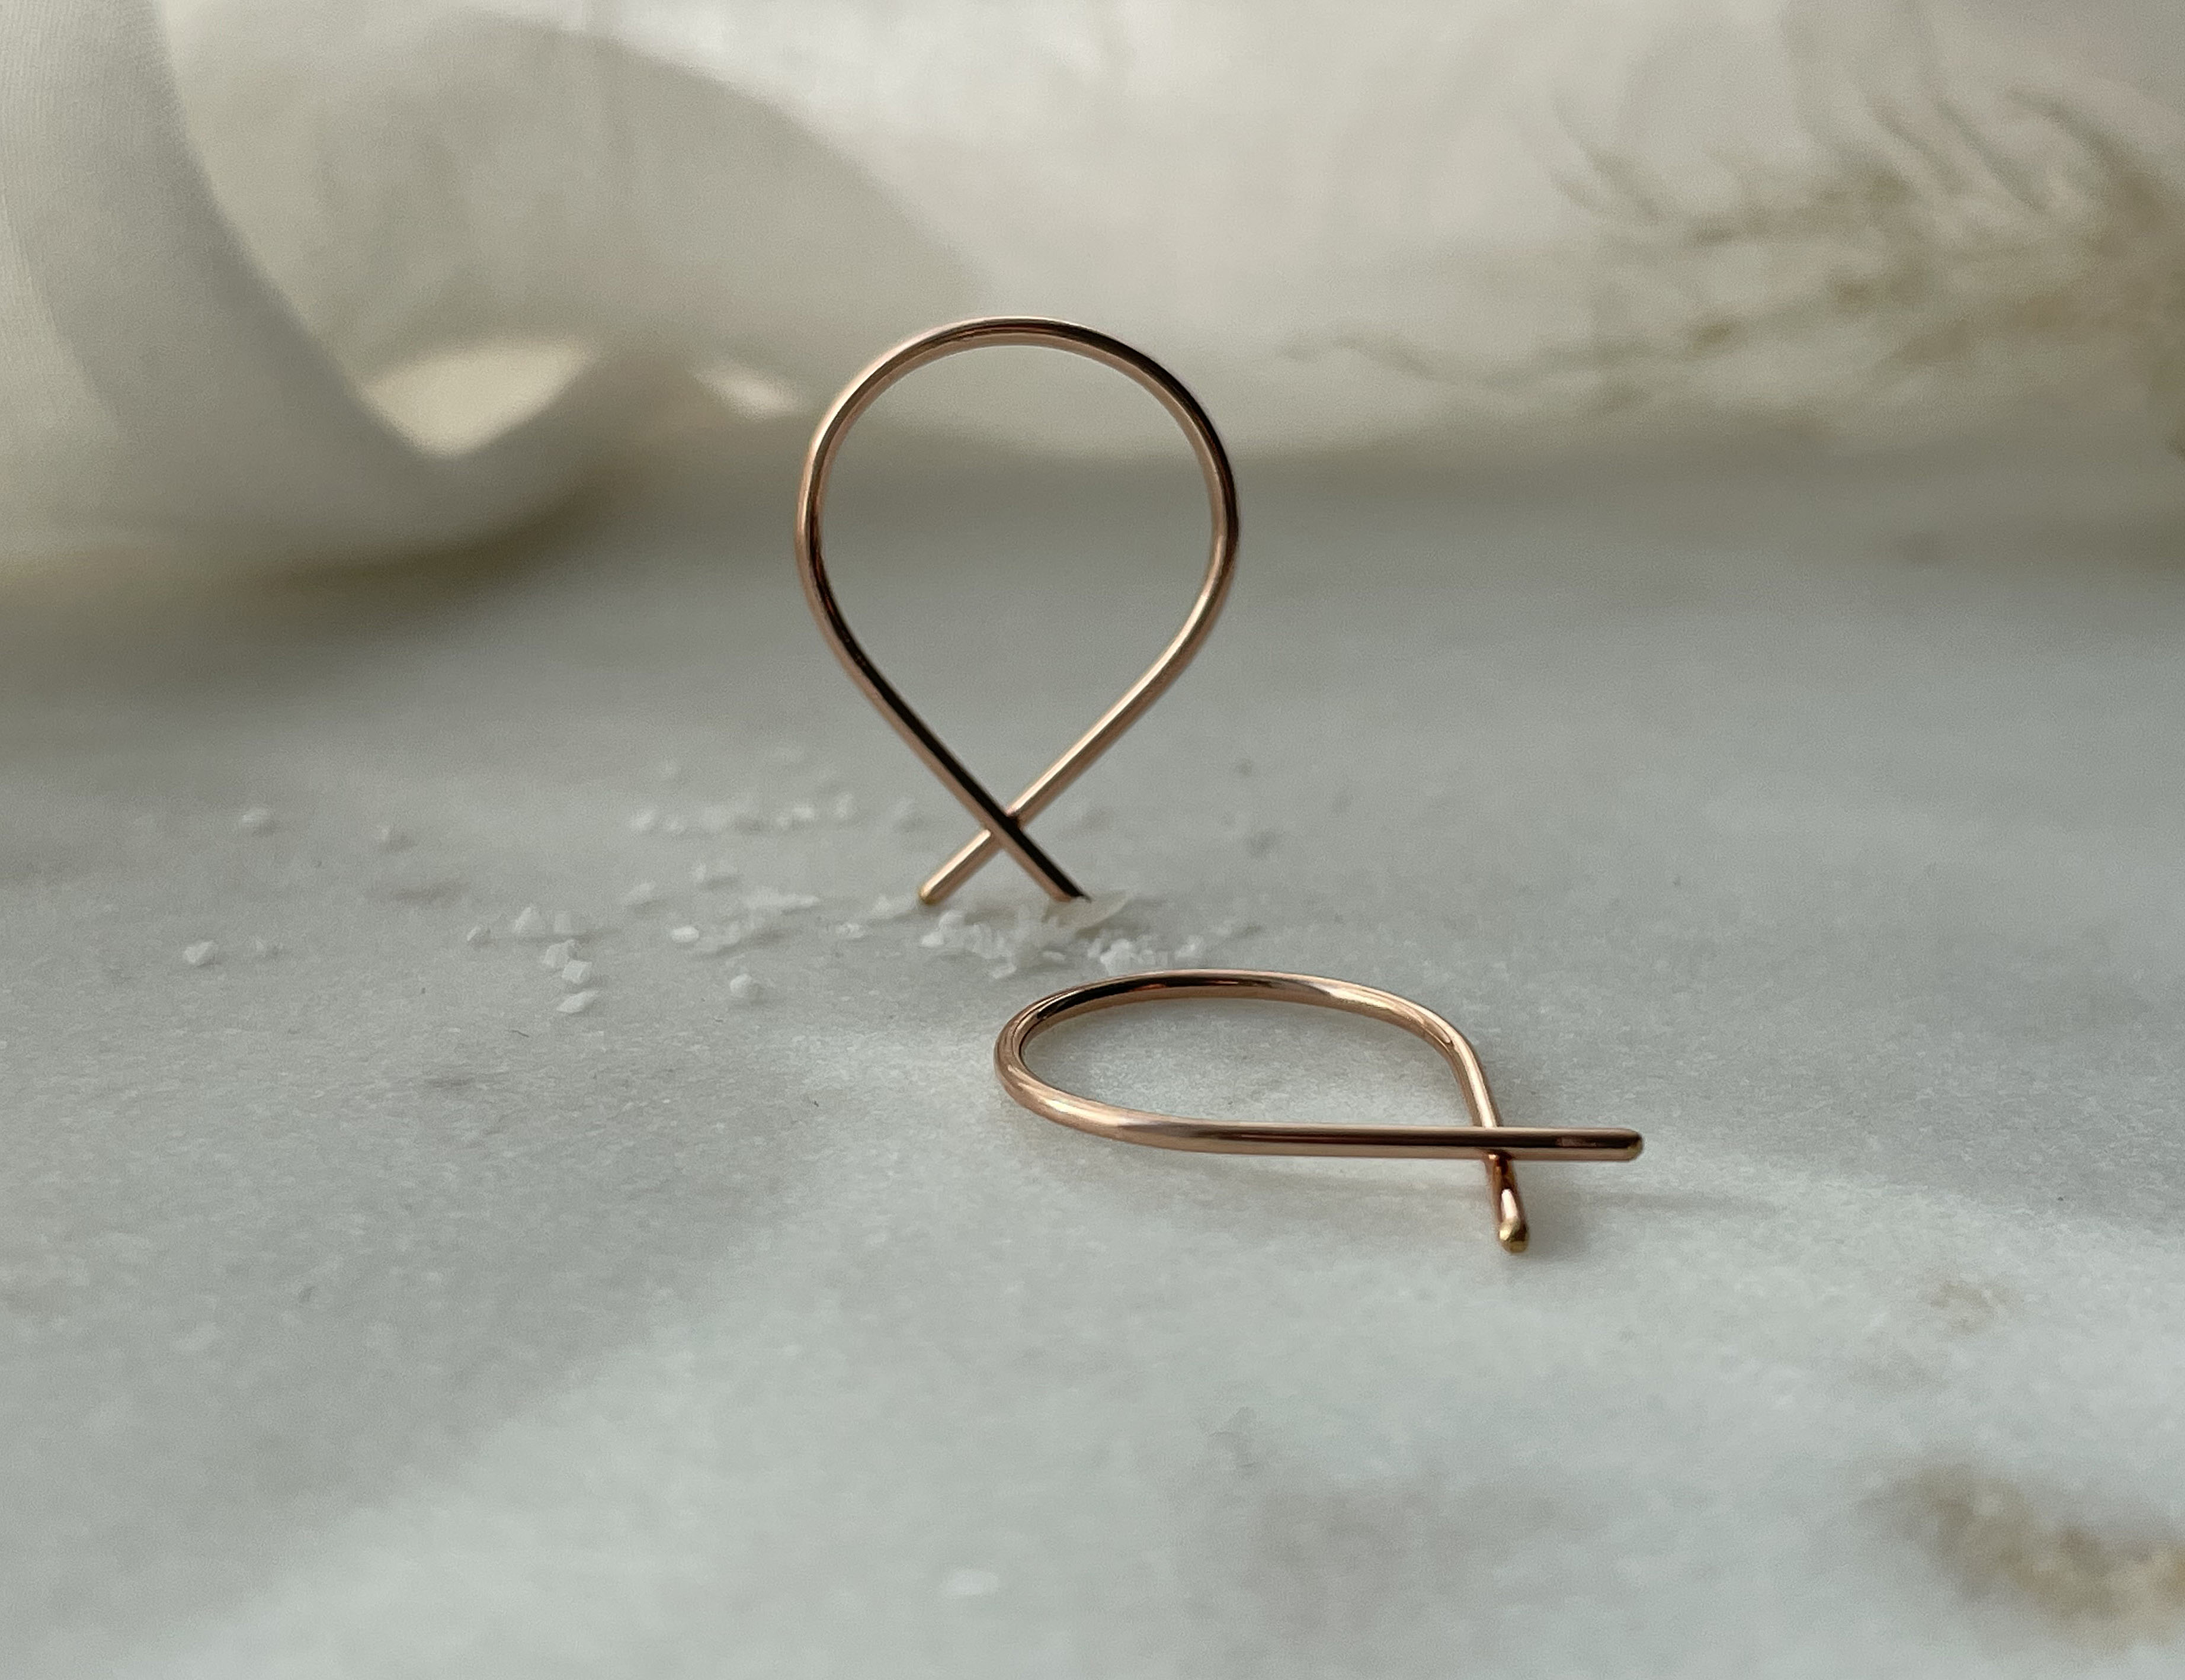 Small Fish Earrings Rose Gold Filled – Concept Jewelry Design